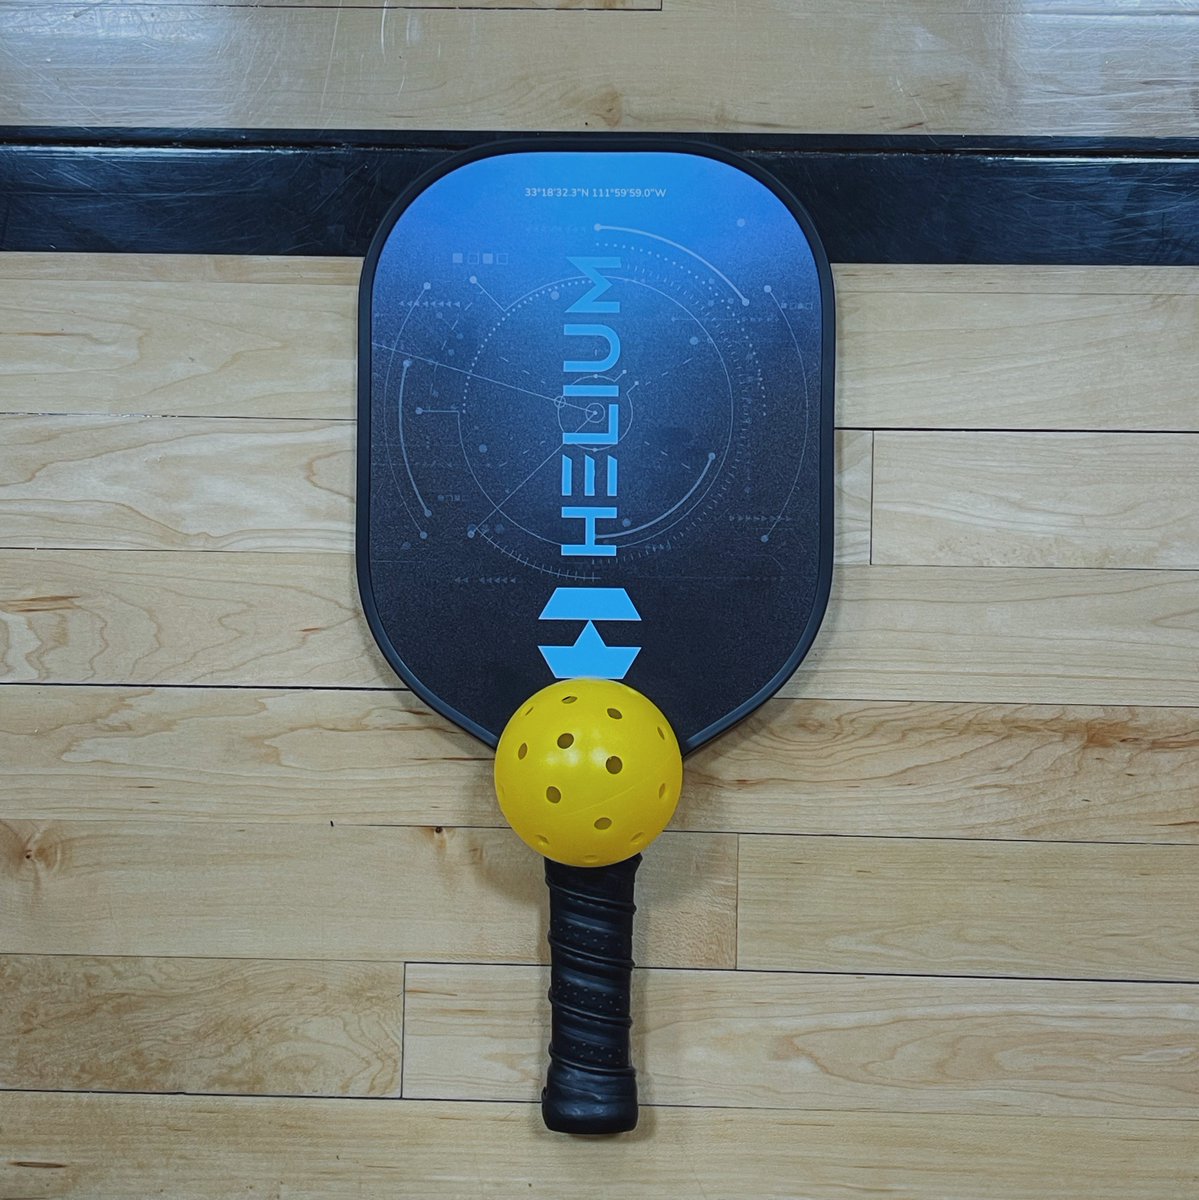 True pickle ball players dedicate their lives — to the paddle! 😤
•
#VCAB #CampusActivities #CampusLife #PickleBall